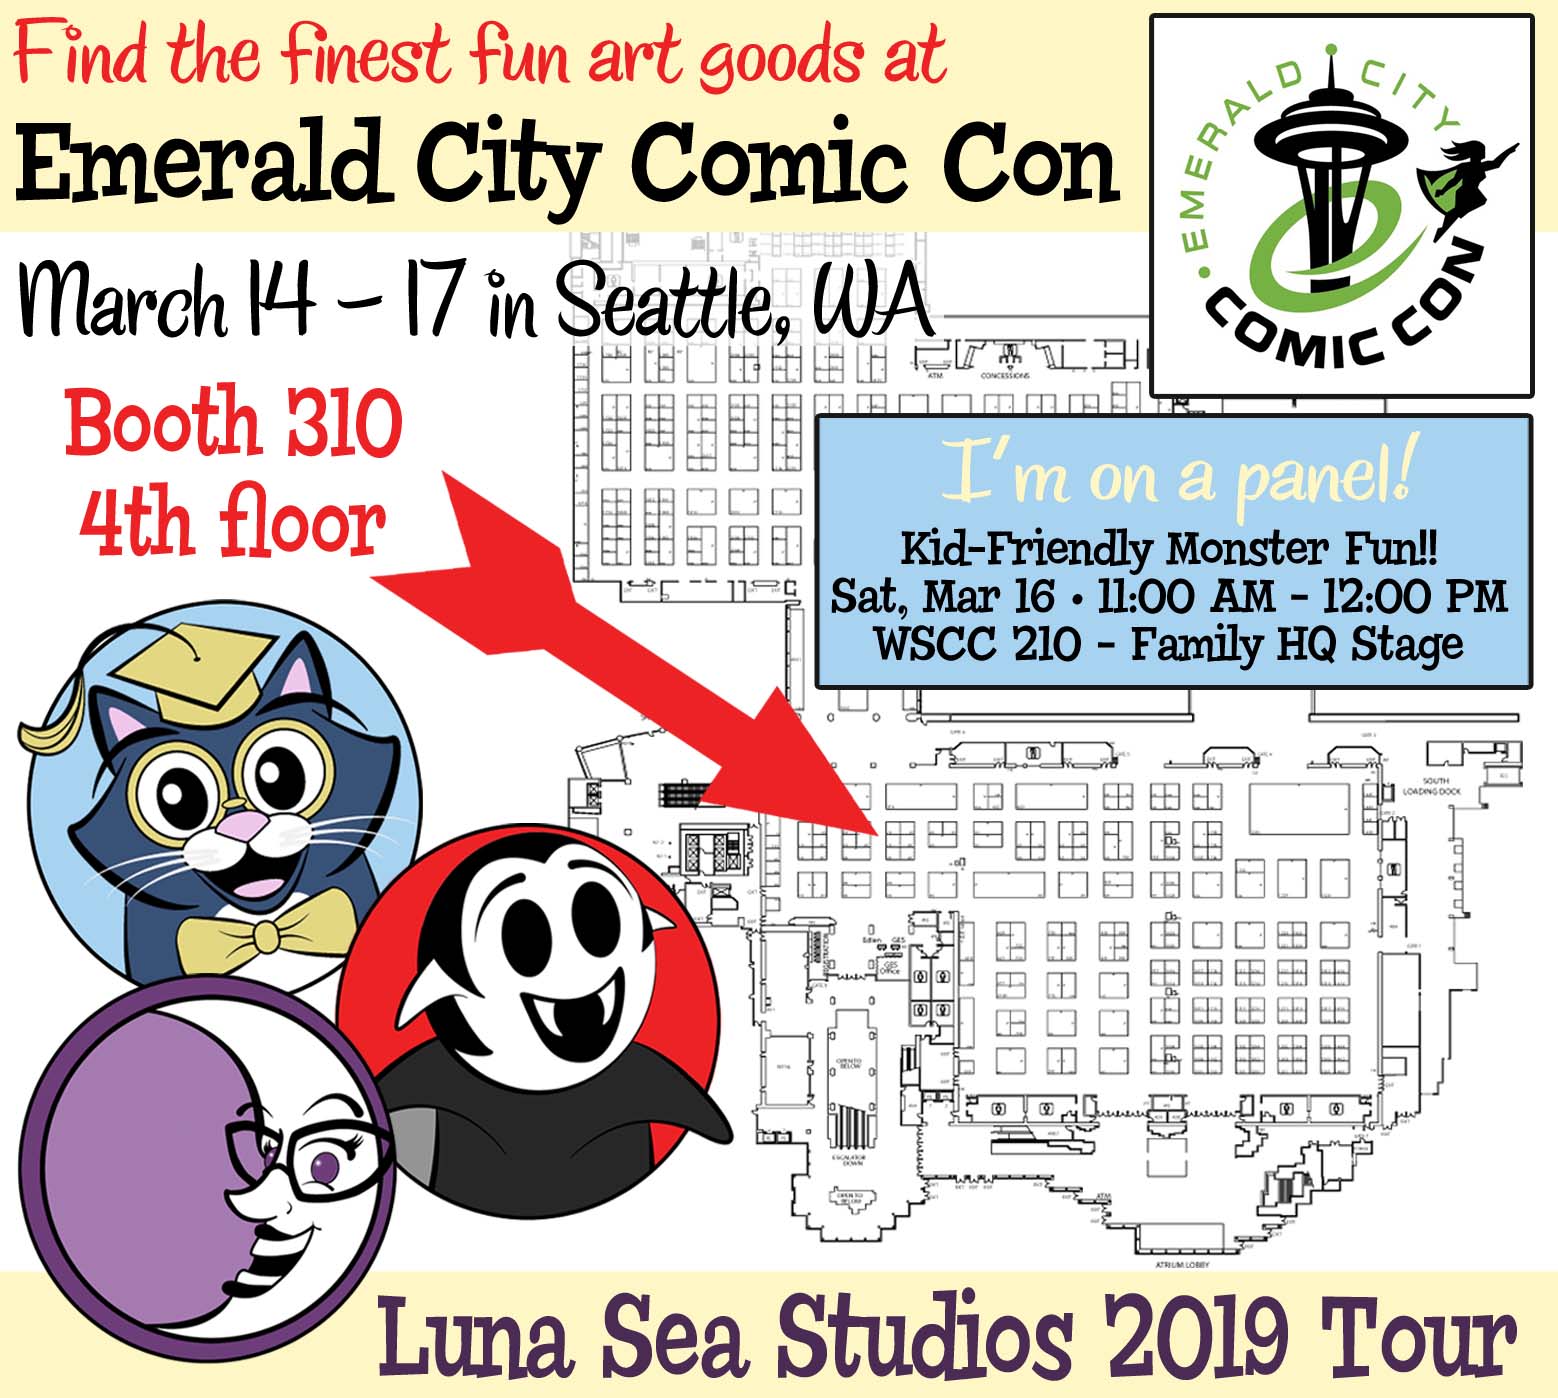 Emerald City Comic Con 2019 exhibitor floor map with the Little Vampires booth highlighted